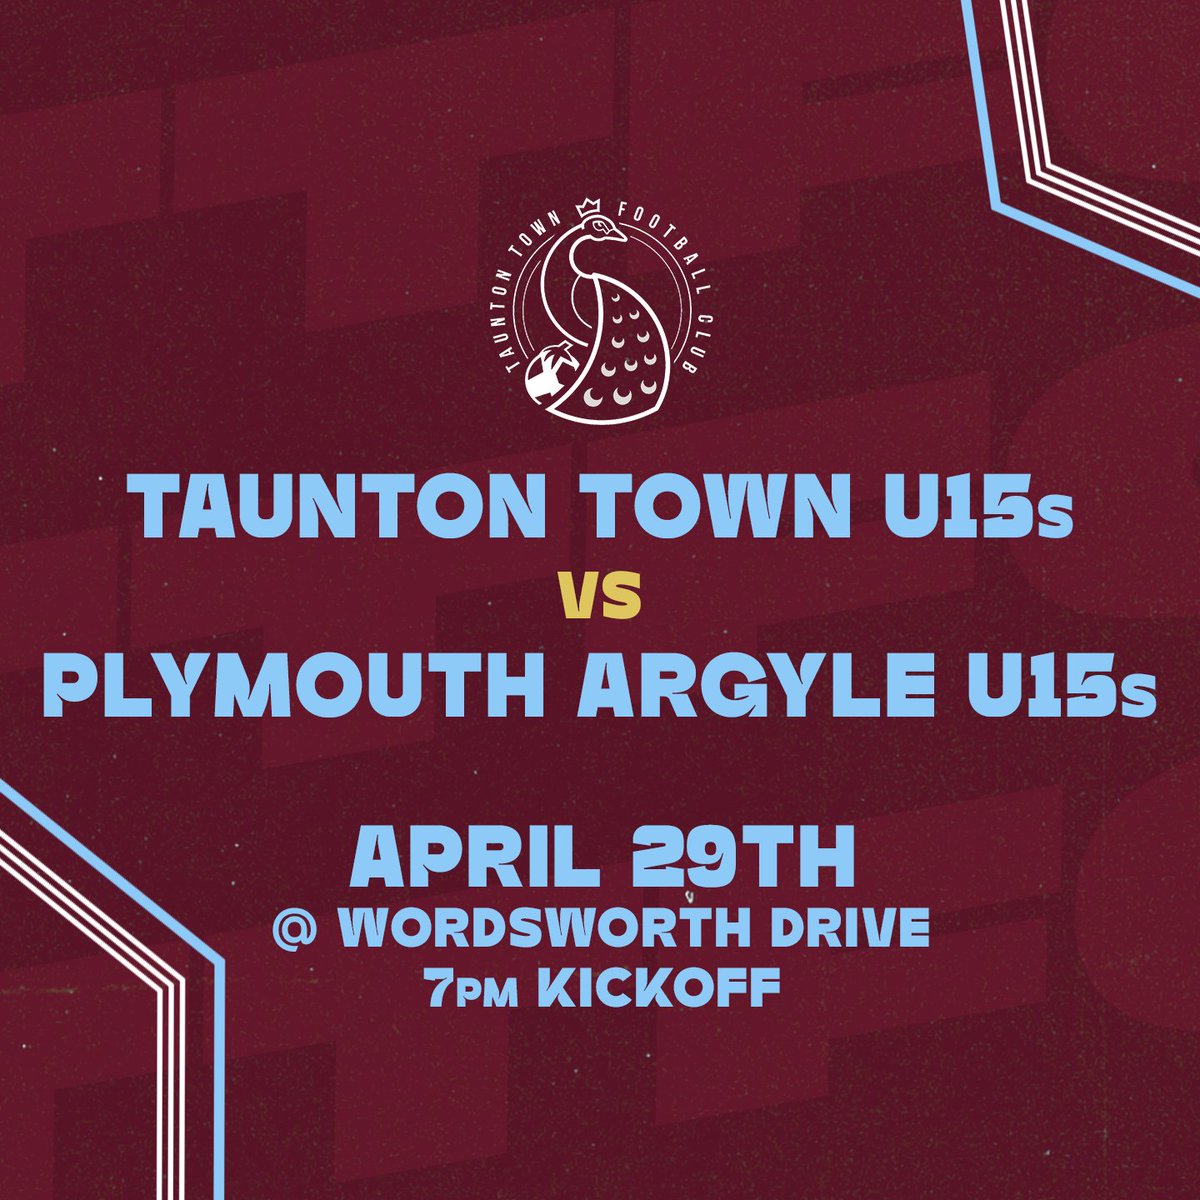 Our in-form Under 15s side are hosting @Argyle Under 15s this Monday night at Wordsworth Drive 👀 Come on down and support the Next Generation of Peacocks 🦚 #UpThePeacocks 🦚